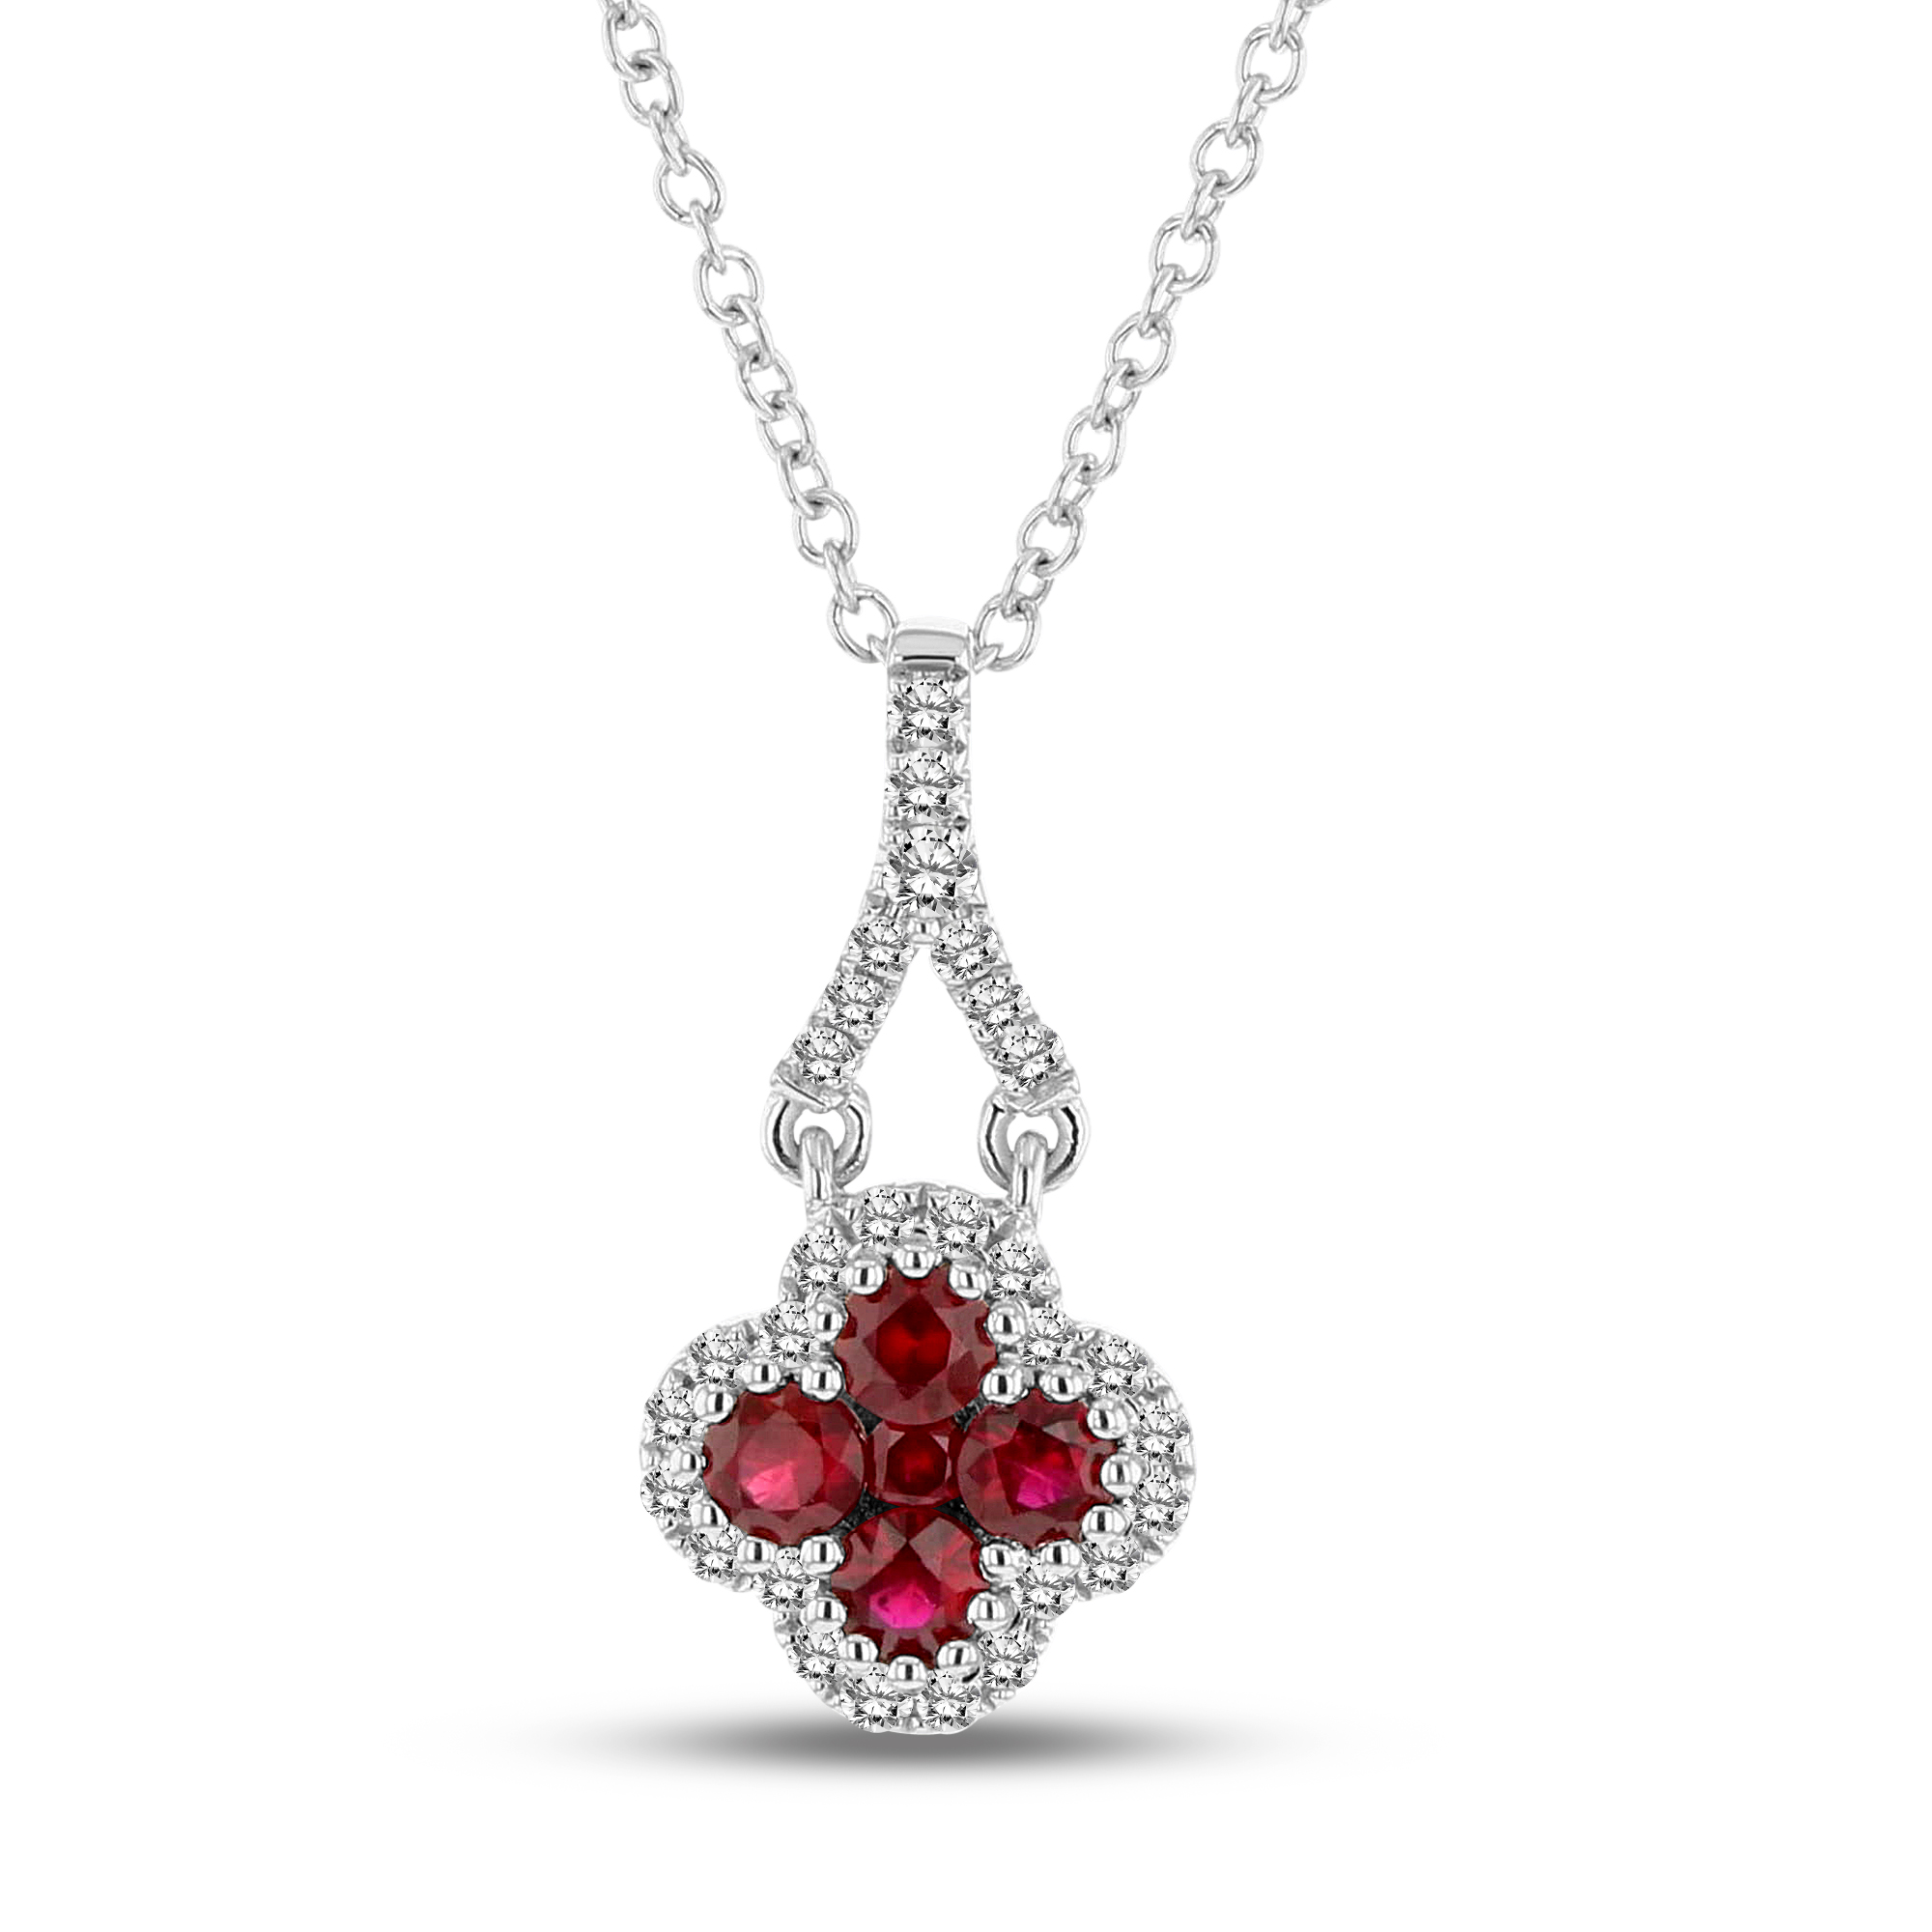 View 0.11ctw Diamond and Ruby Pendant in 18k White Gold